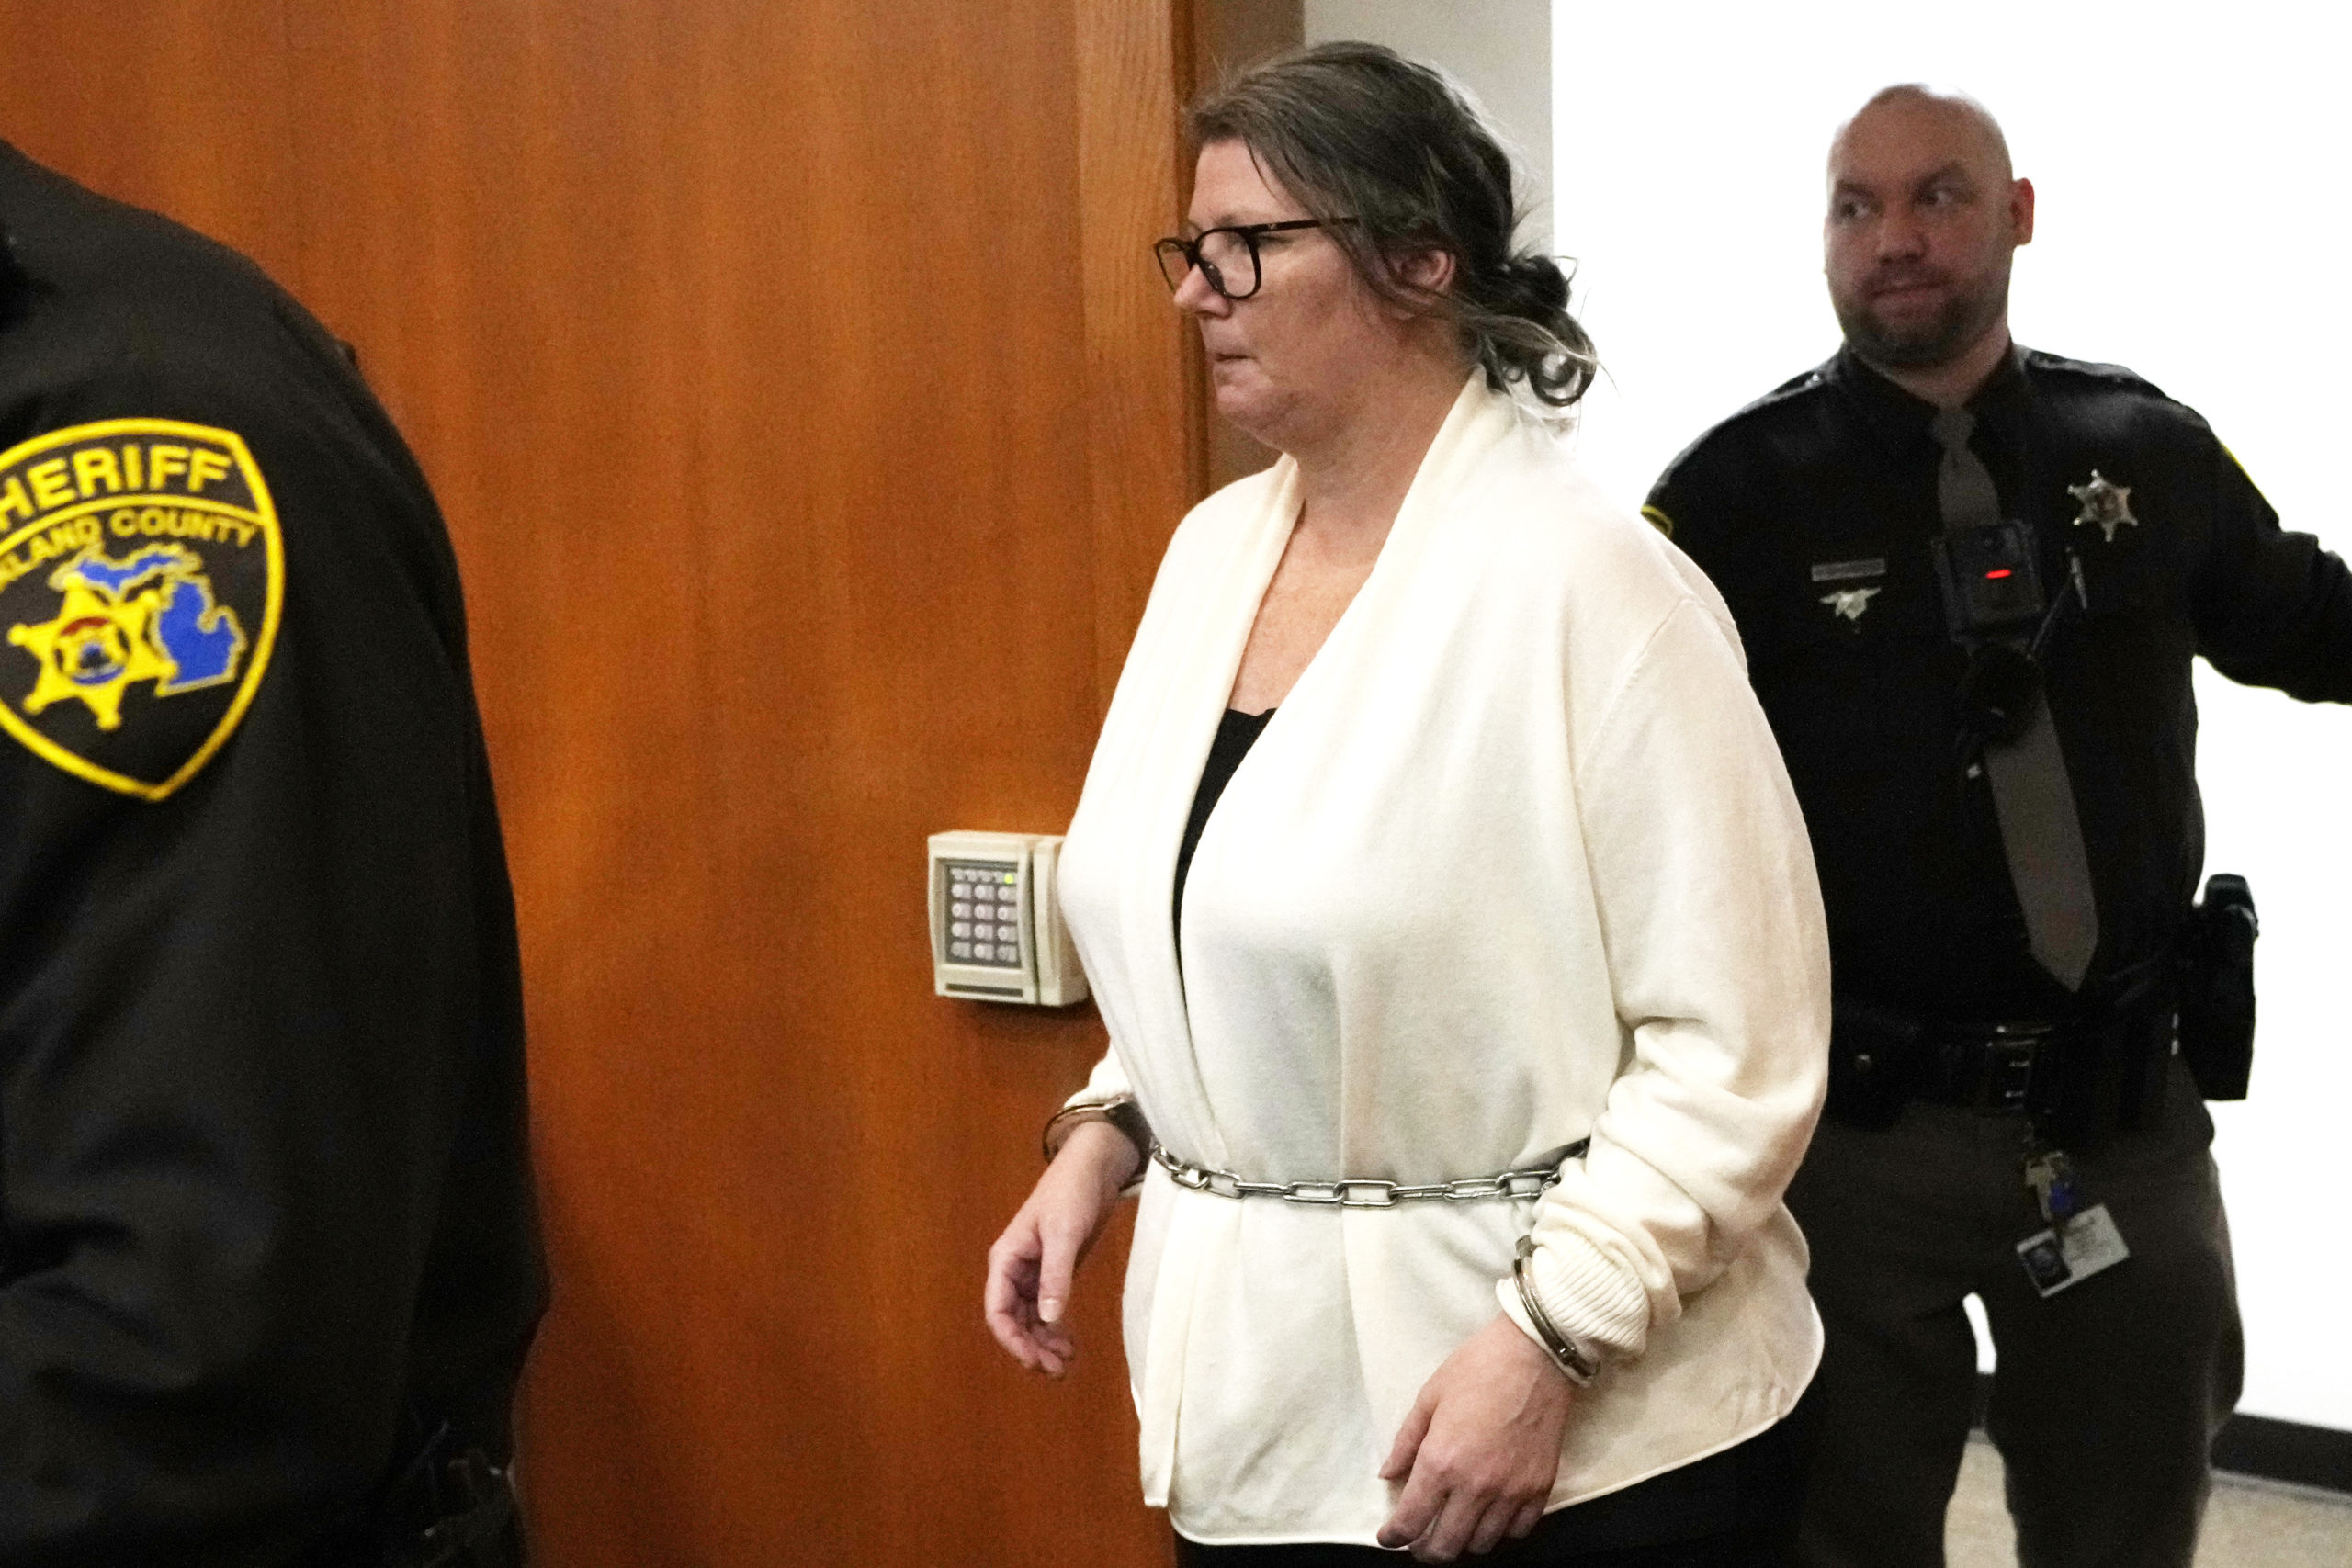 Jennifer Crumbley walks into the Oakland County courtroom of Judge Cheryl Matthews in Pontiac, Michigan, before being found guilty on four counts of involuntary manslaughter on Tuesday.